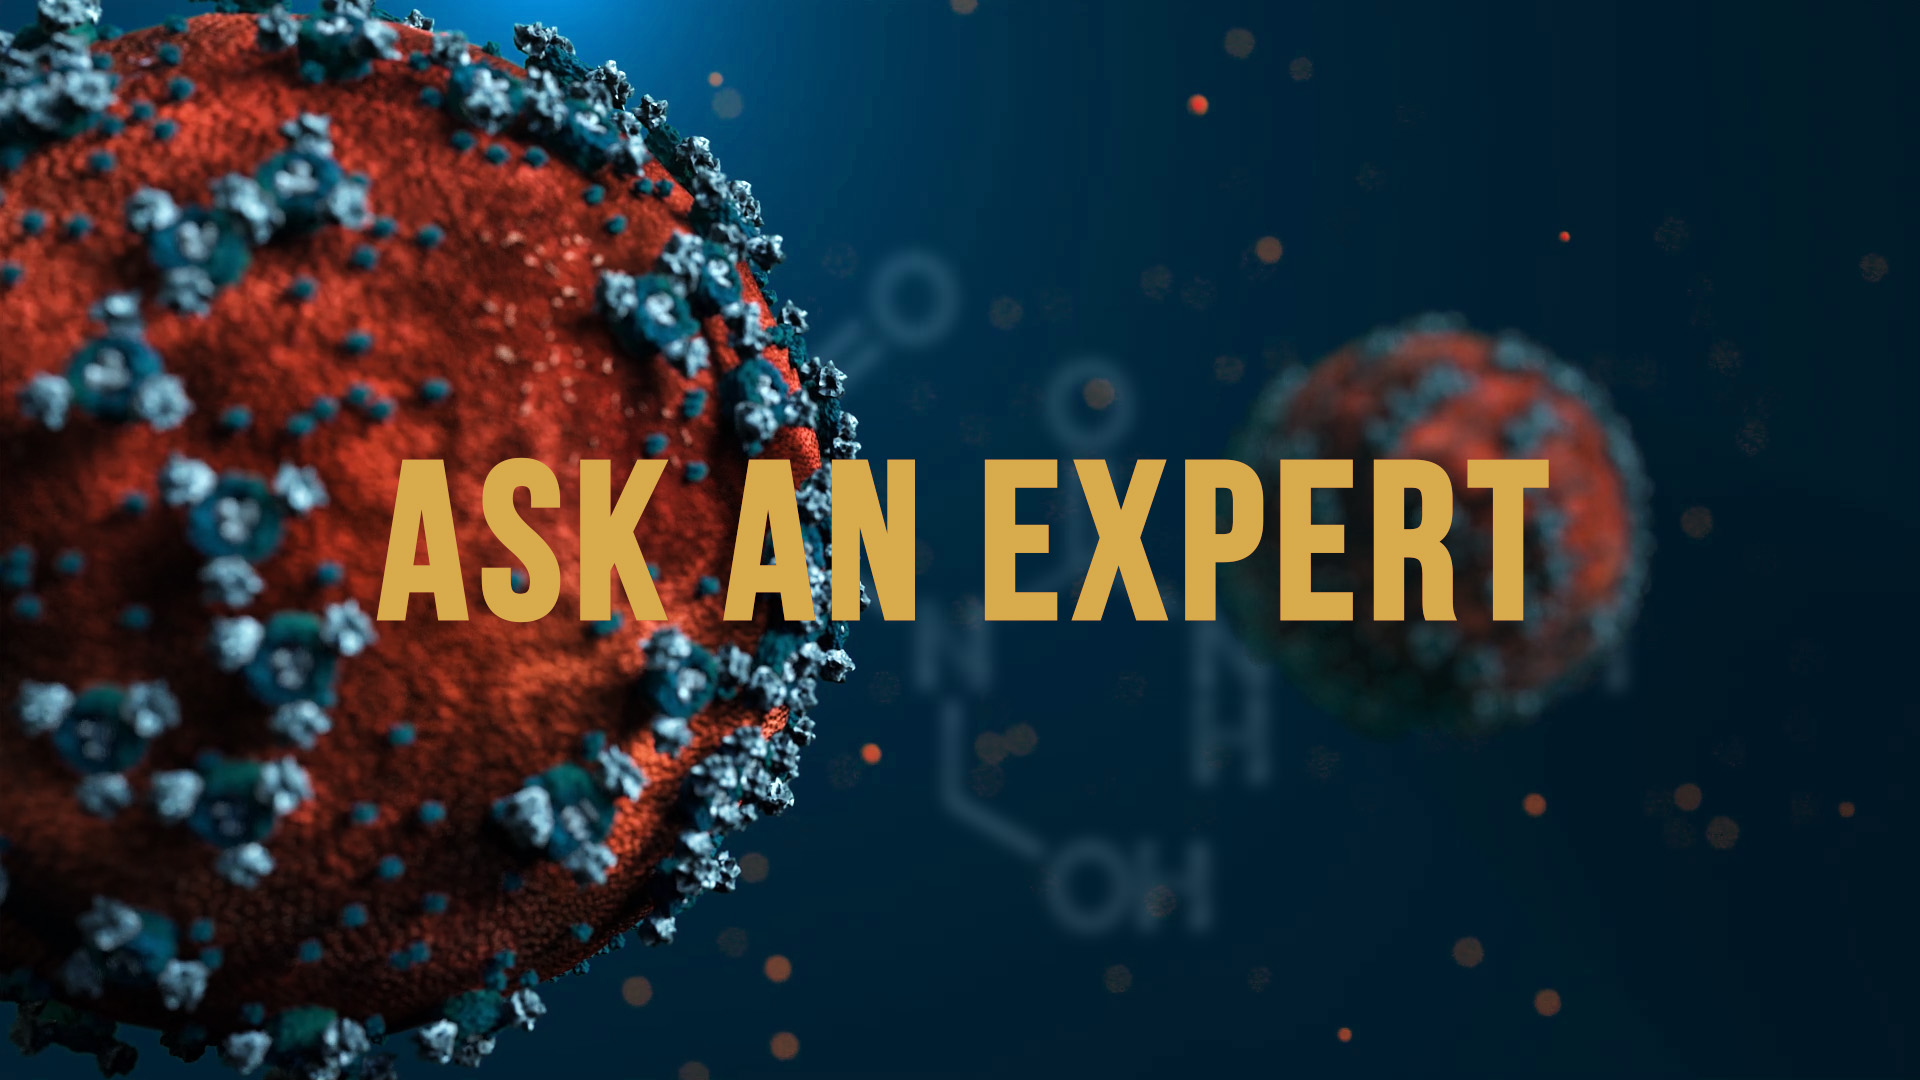 Ask an Expert: Is getting COVID-19 a moral failure?